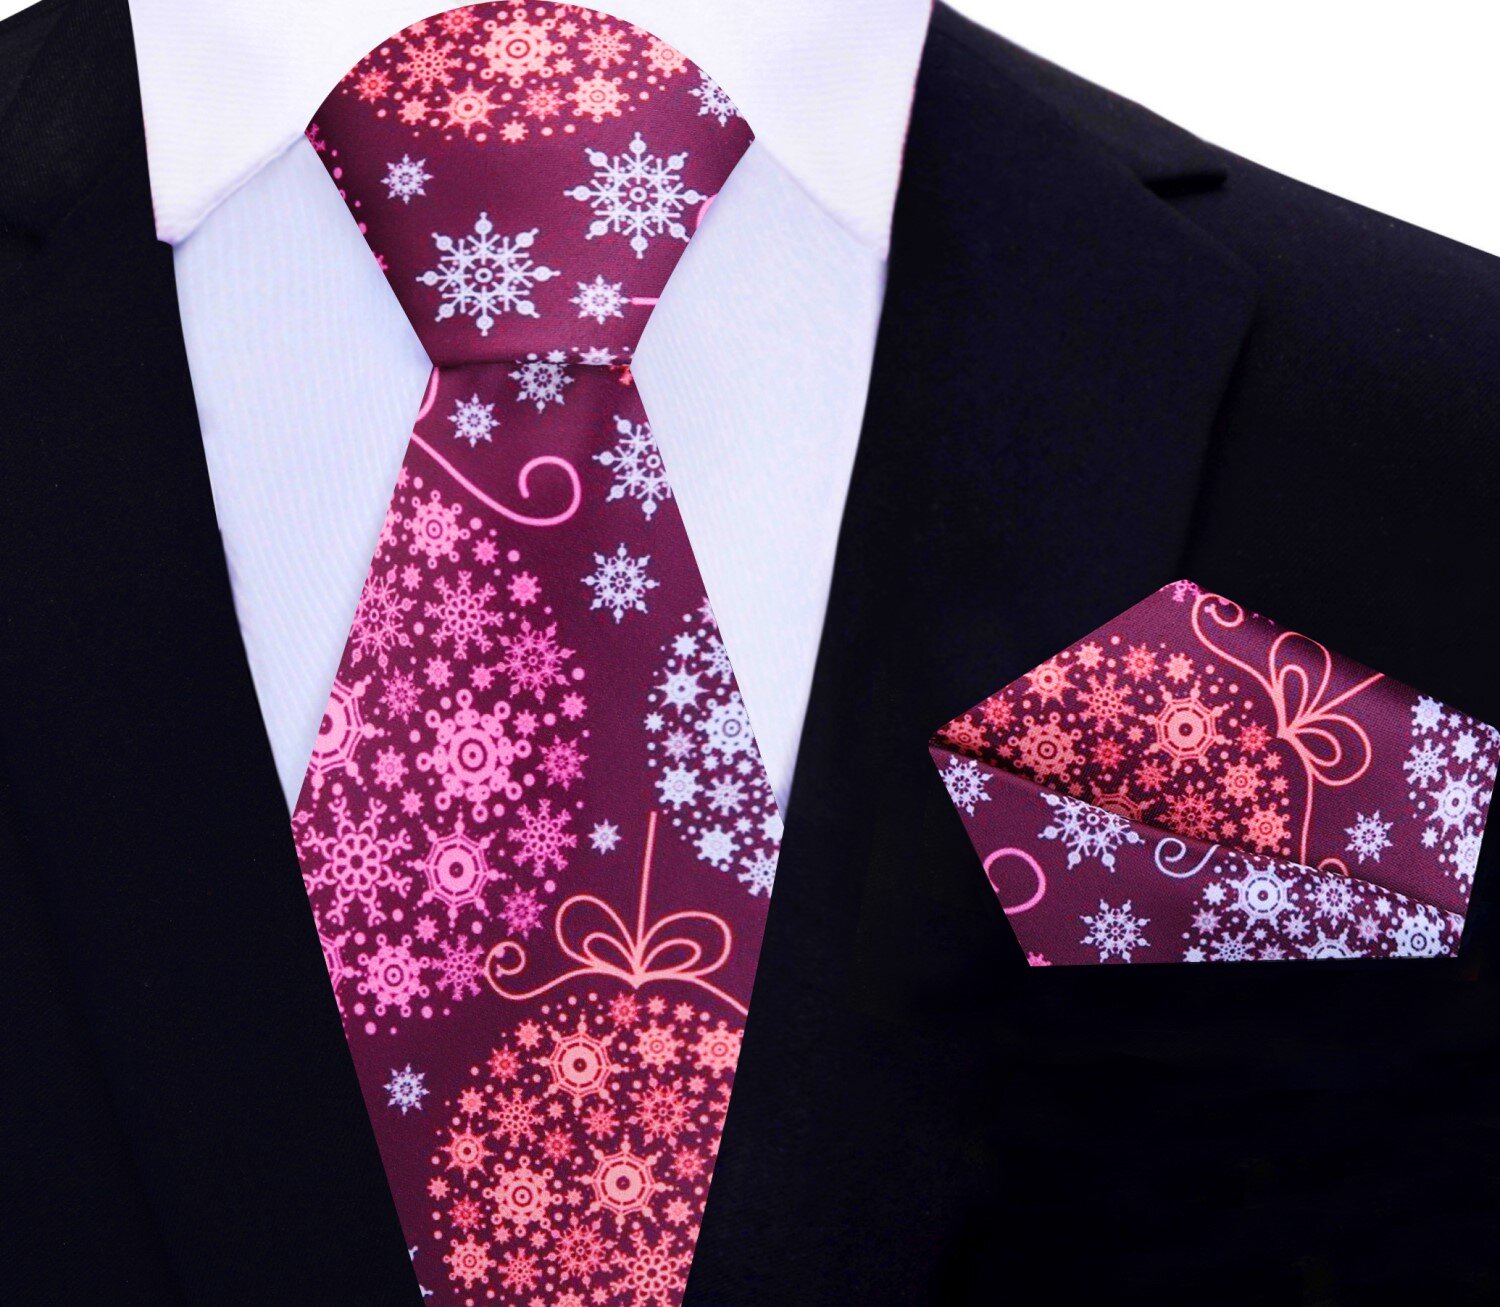 Main: Plum, Pink, Red, White Christmas Ornaments Tie and Pocket Square